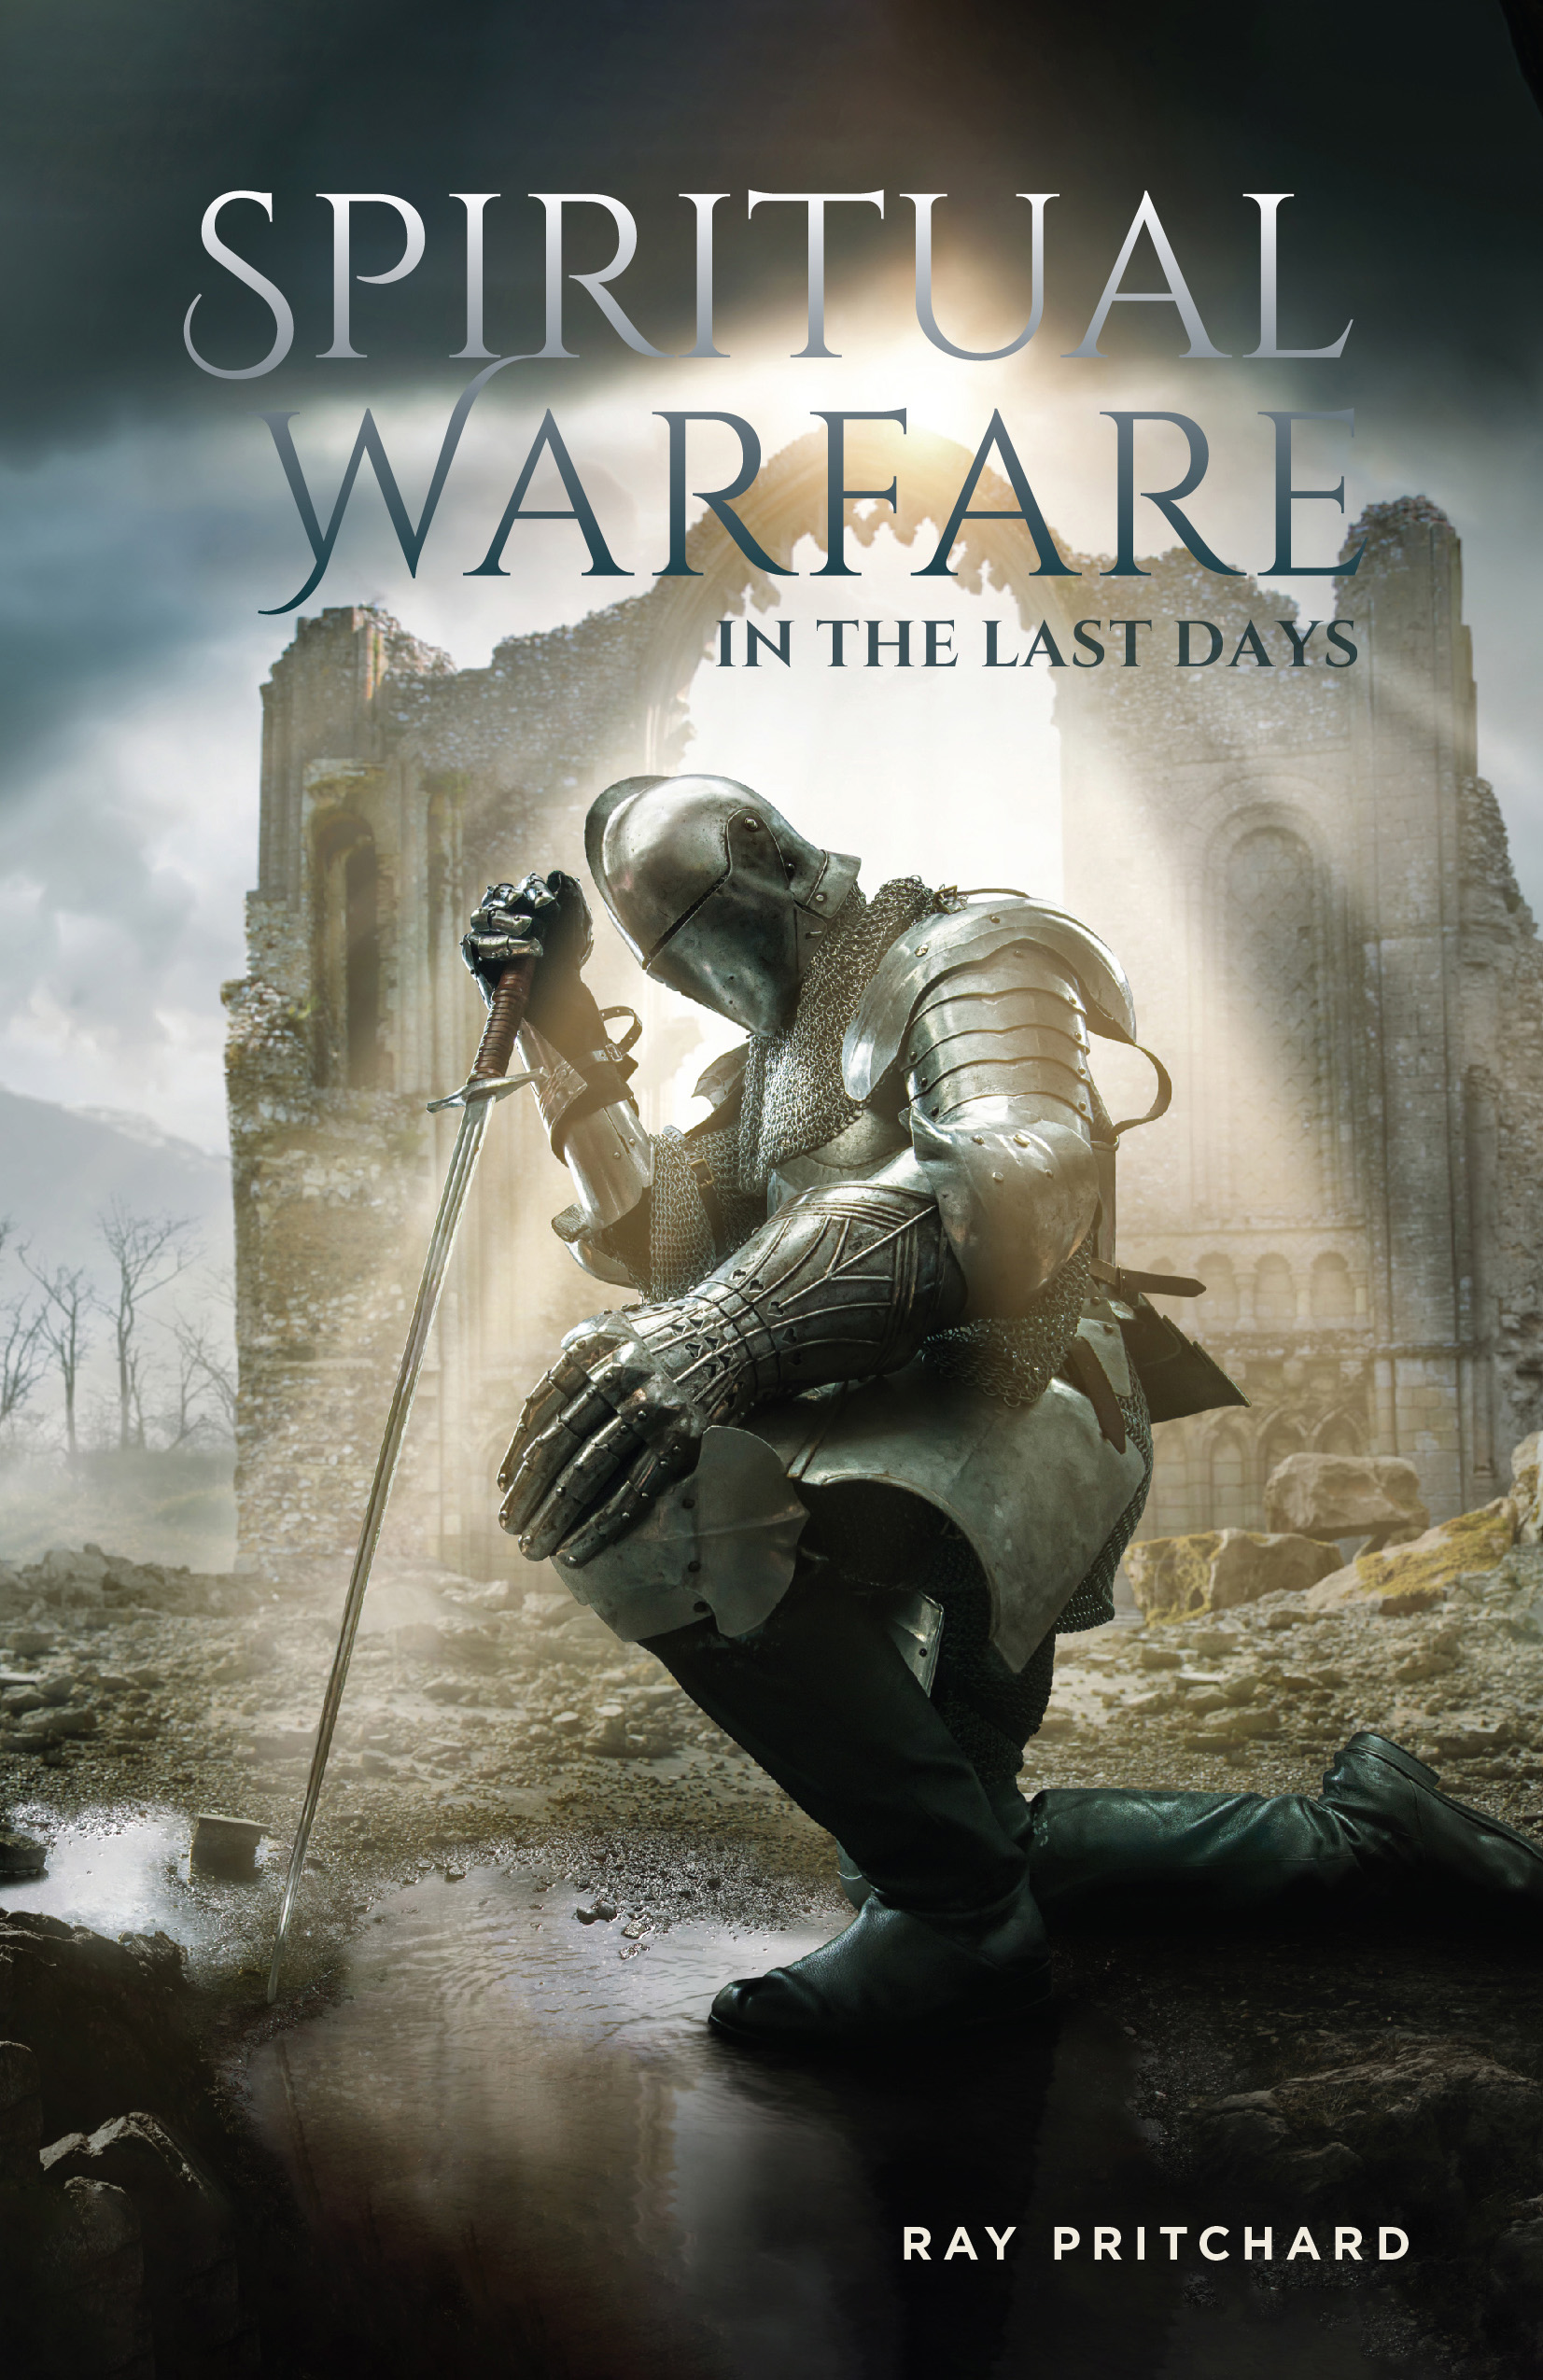 Get Your Copy of “Spiritual Warfare in the Last Days”